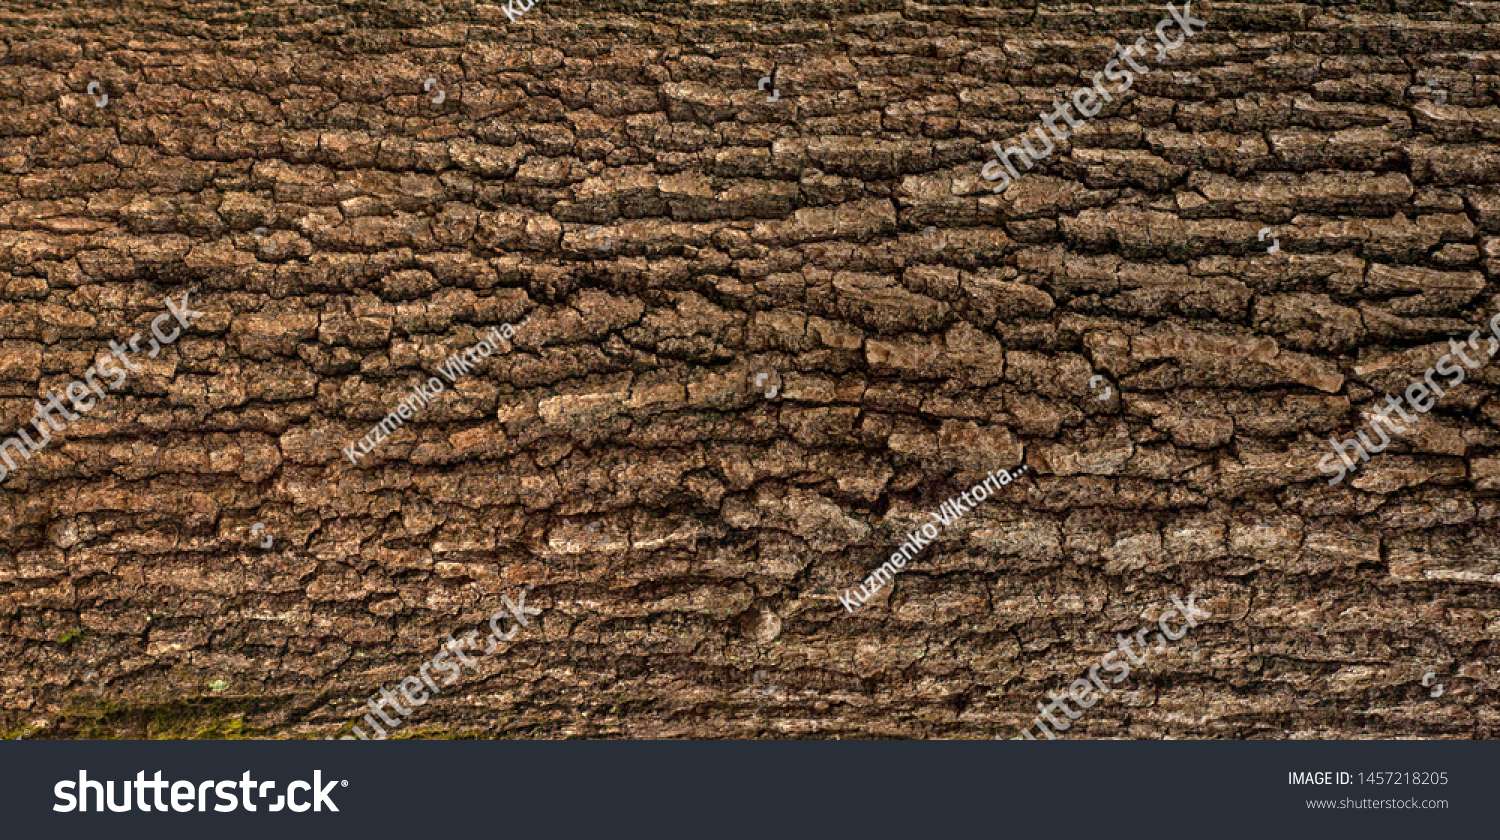 Relief texture of the brown bark of a tree with green moss on it. Horizontal photo of a tree bark texture. Relief creative texture of an old oak bark. #1457218205